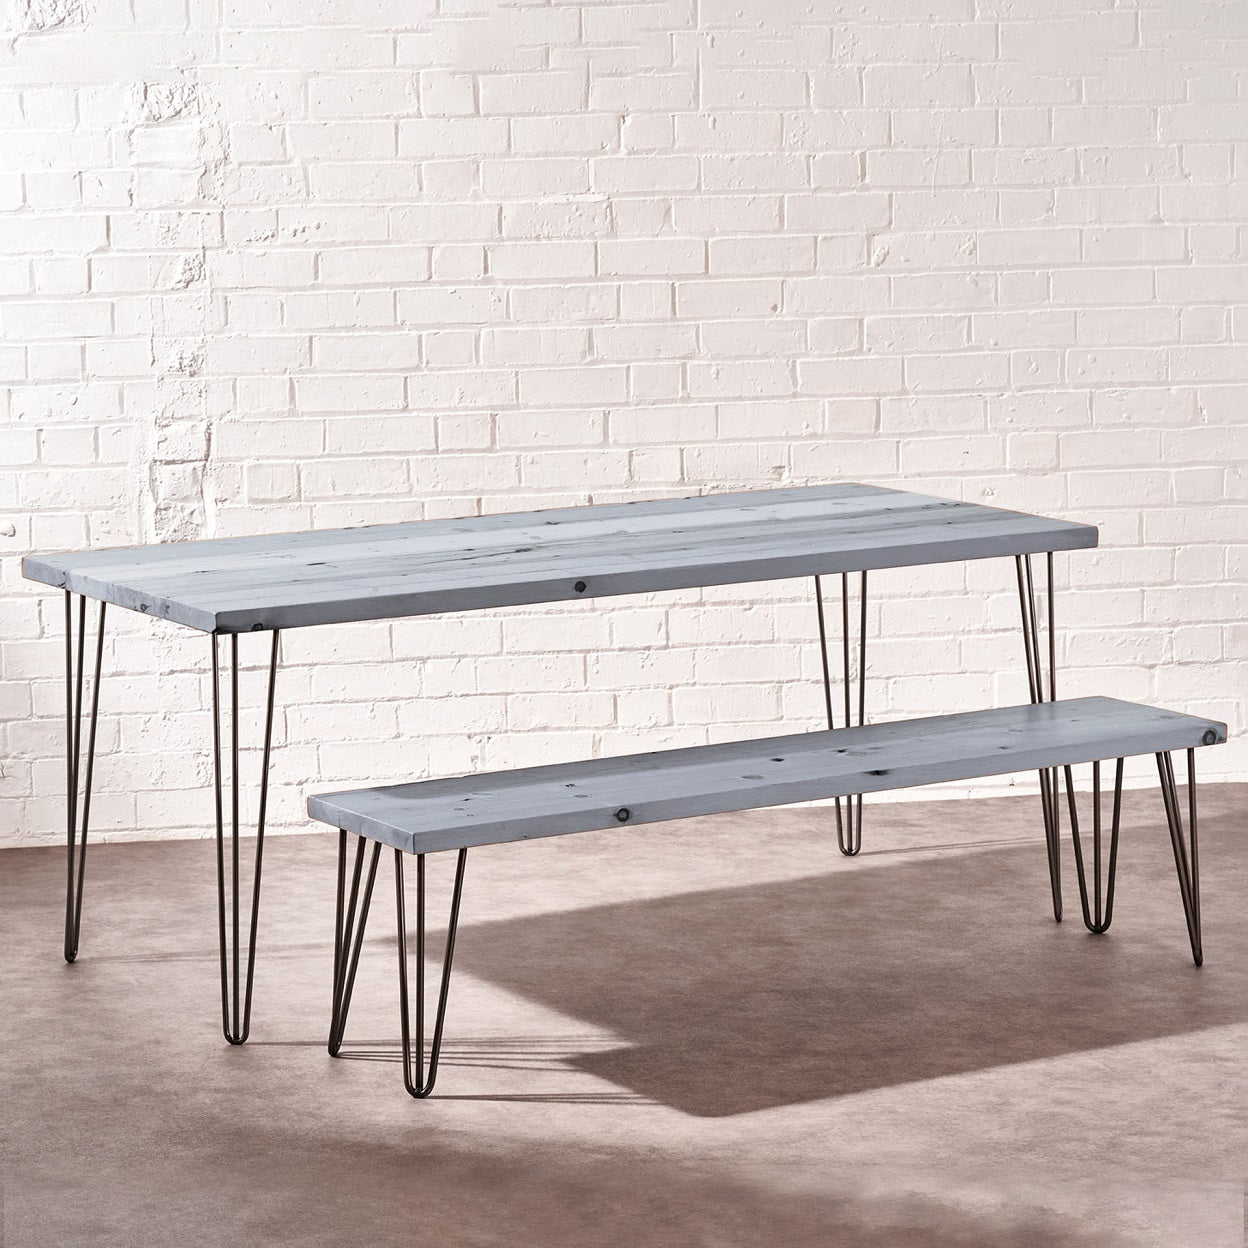 Handcrafted Modern Dining Table with Hairpin Legs in Variety of Colours, Sizes and Bench Options